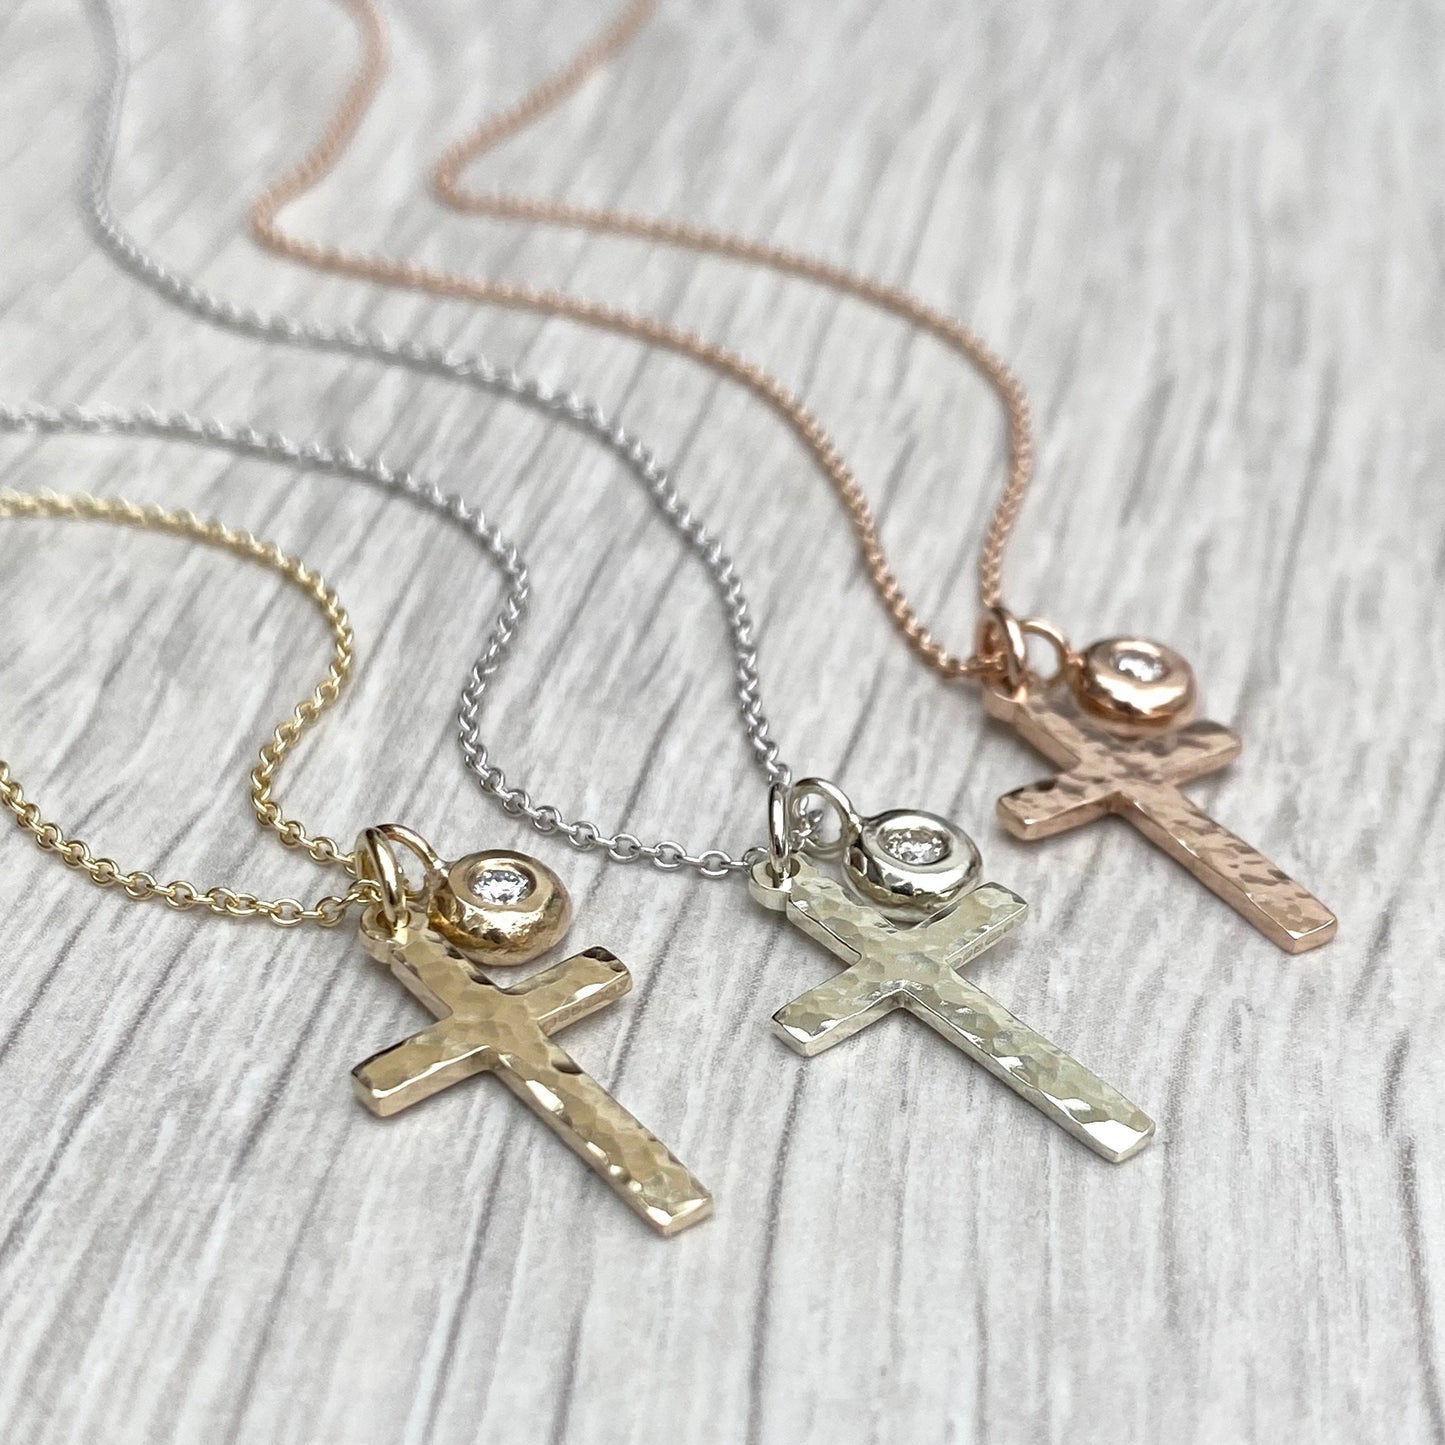 9ct solid yellow, white or rose gold hammered small cross pendant and trace chain with a diamond nugget pendant